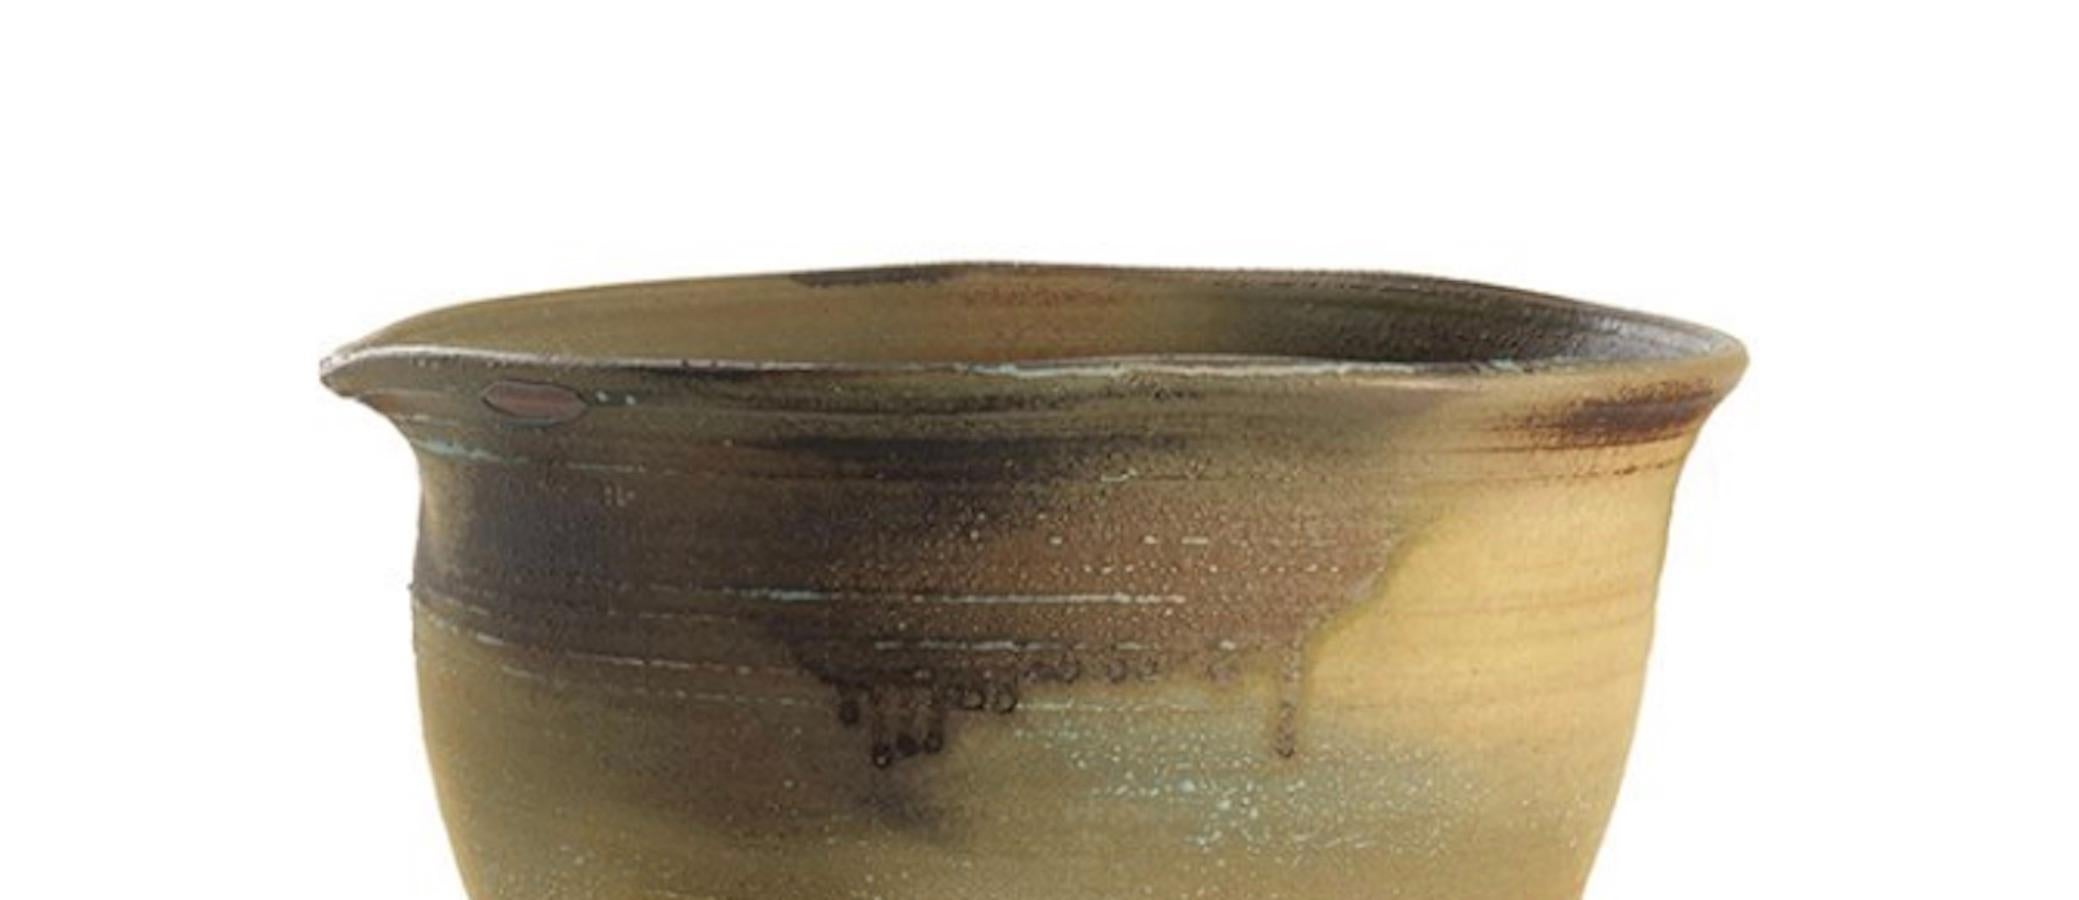 Contemporary Chinese ceramic bowl with decorative drip glaze
Shades of khaki, dark brown, sage and light blue
Matte finish
